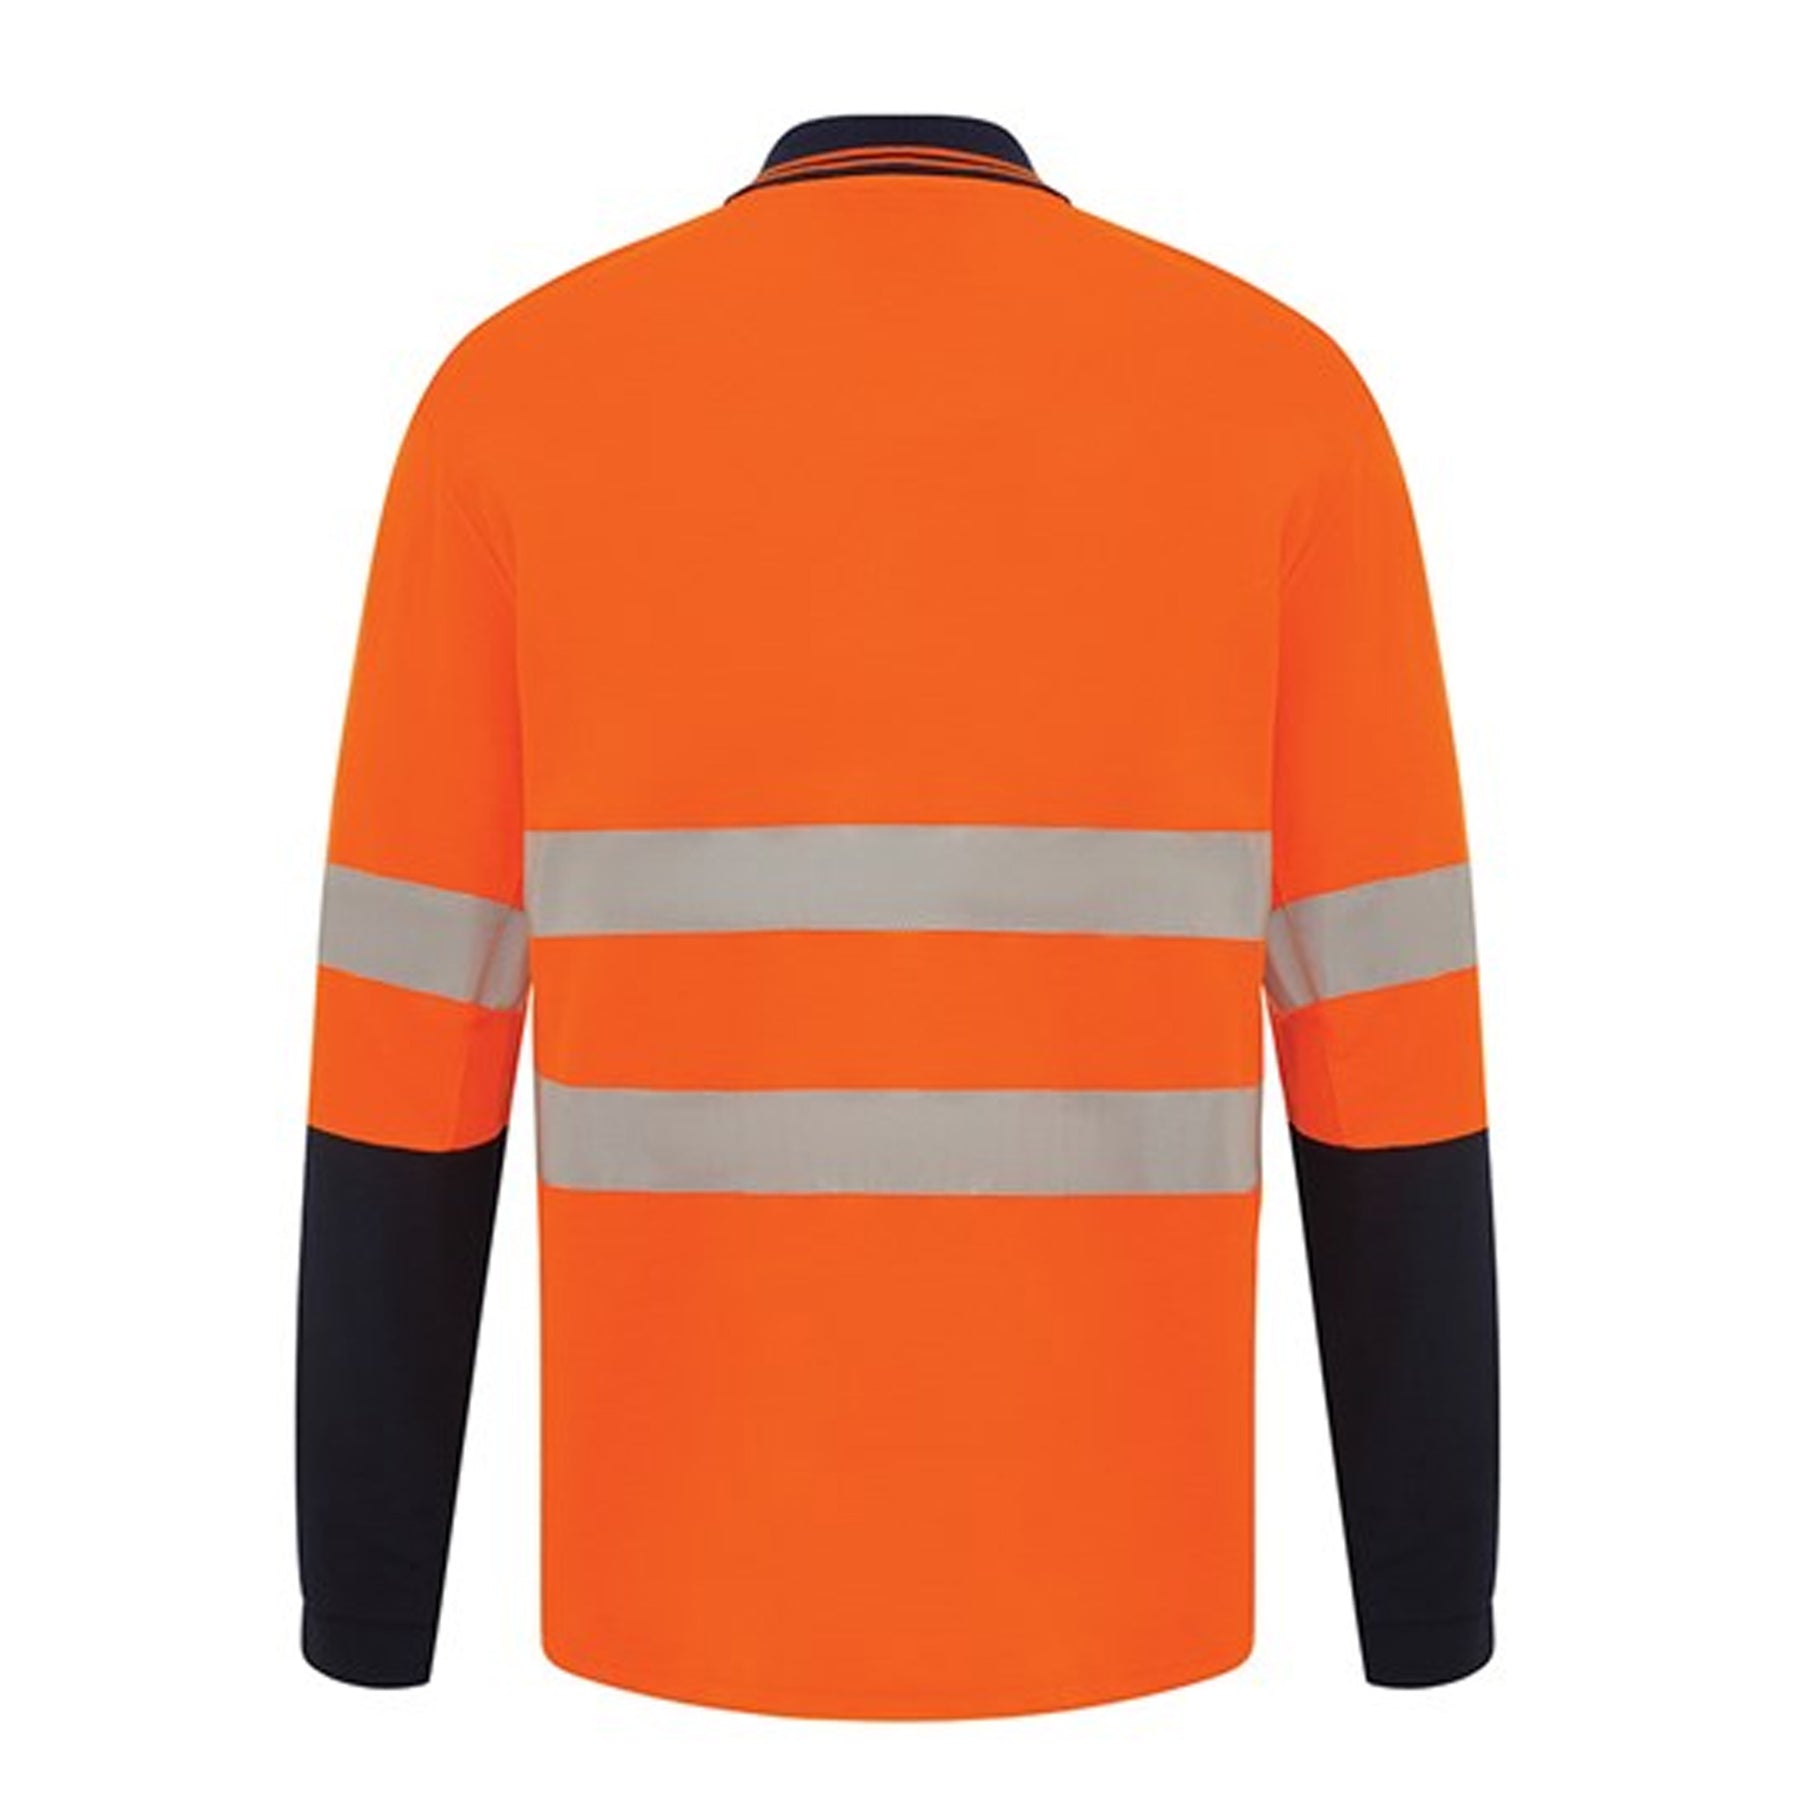 paramounty safety products kevlar cut protection long sleeve taped polo shirt in orange navy